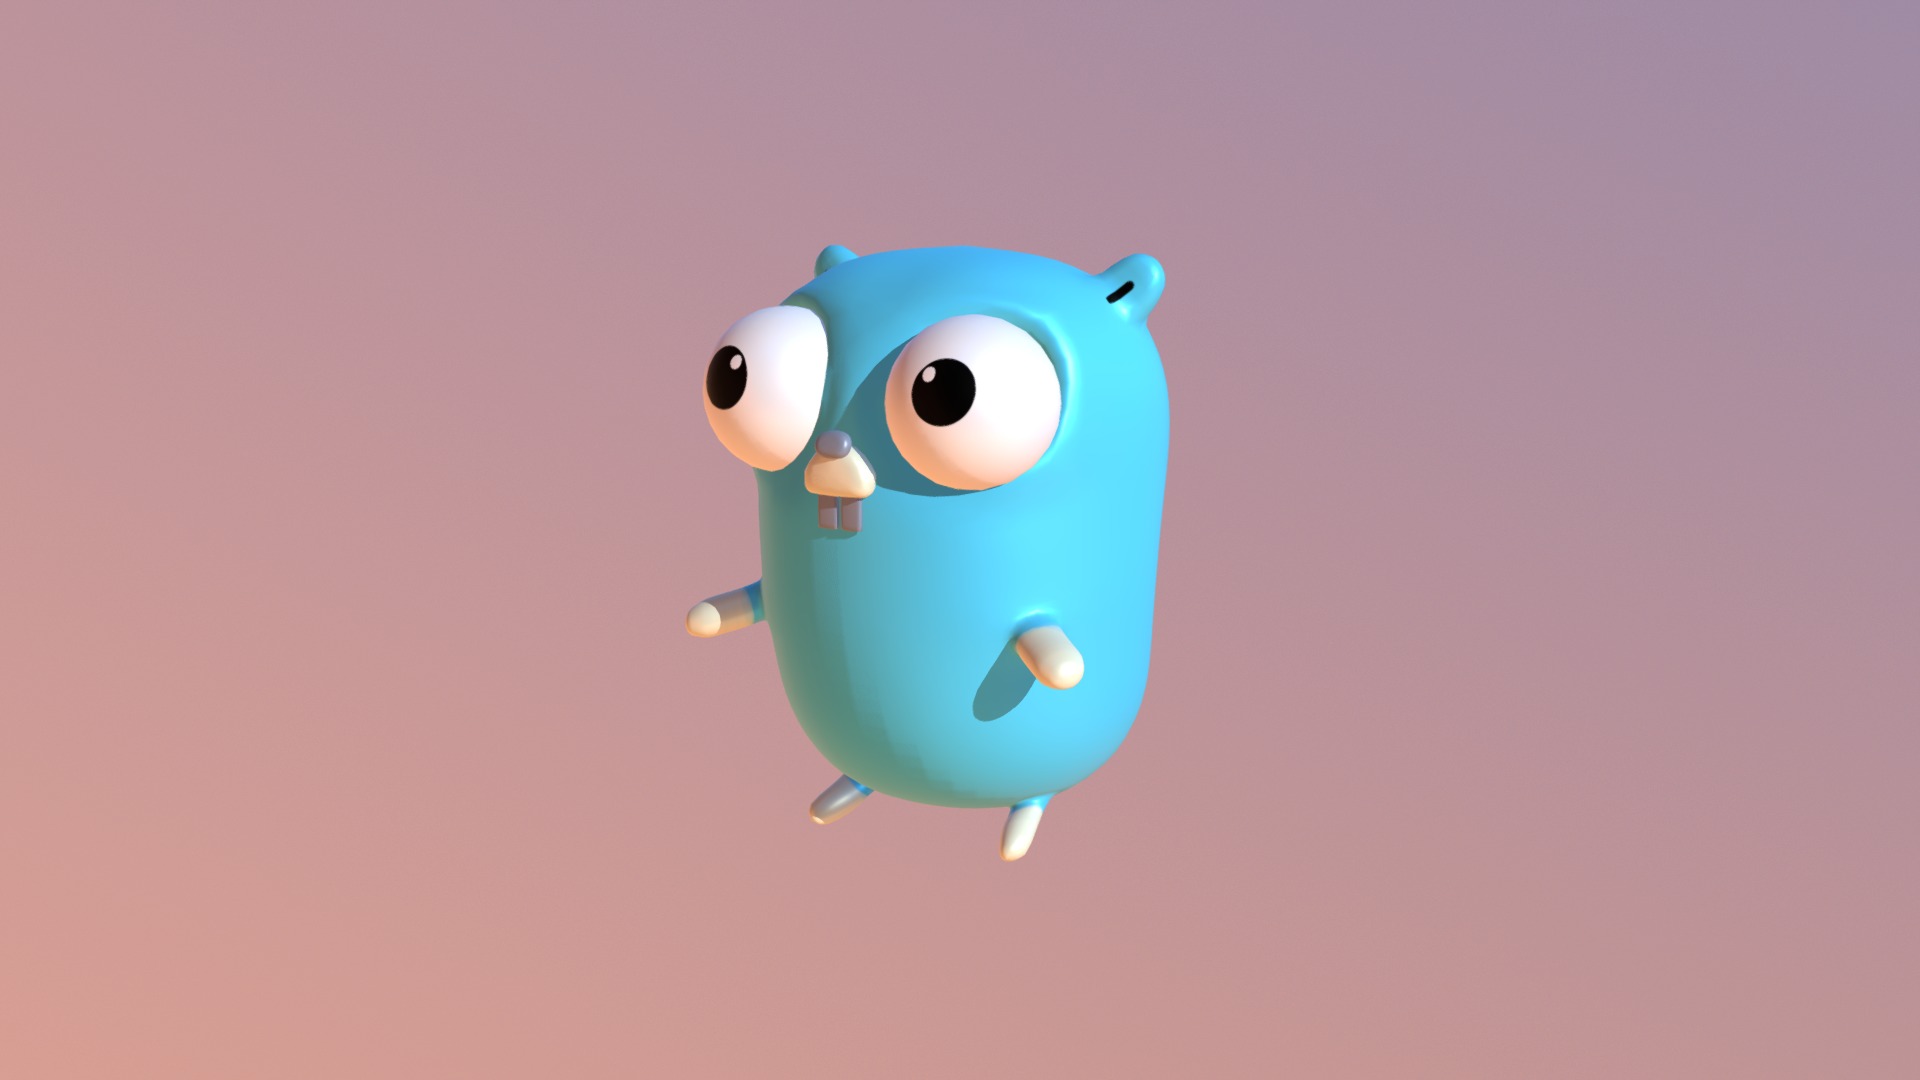 3D model Golang’s Gopher – VR Chat Avatar - This is a 3D model of the Golang's Gopher - VR Chat Avatar. The 3D model is about a blue and white toy.